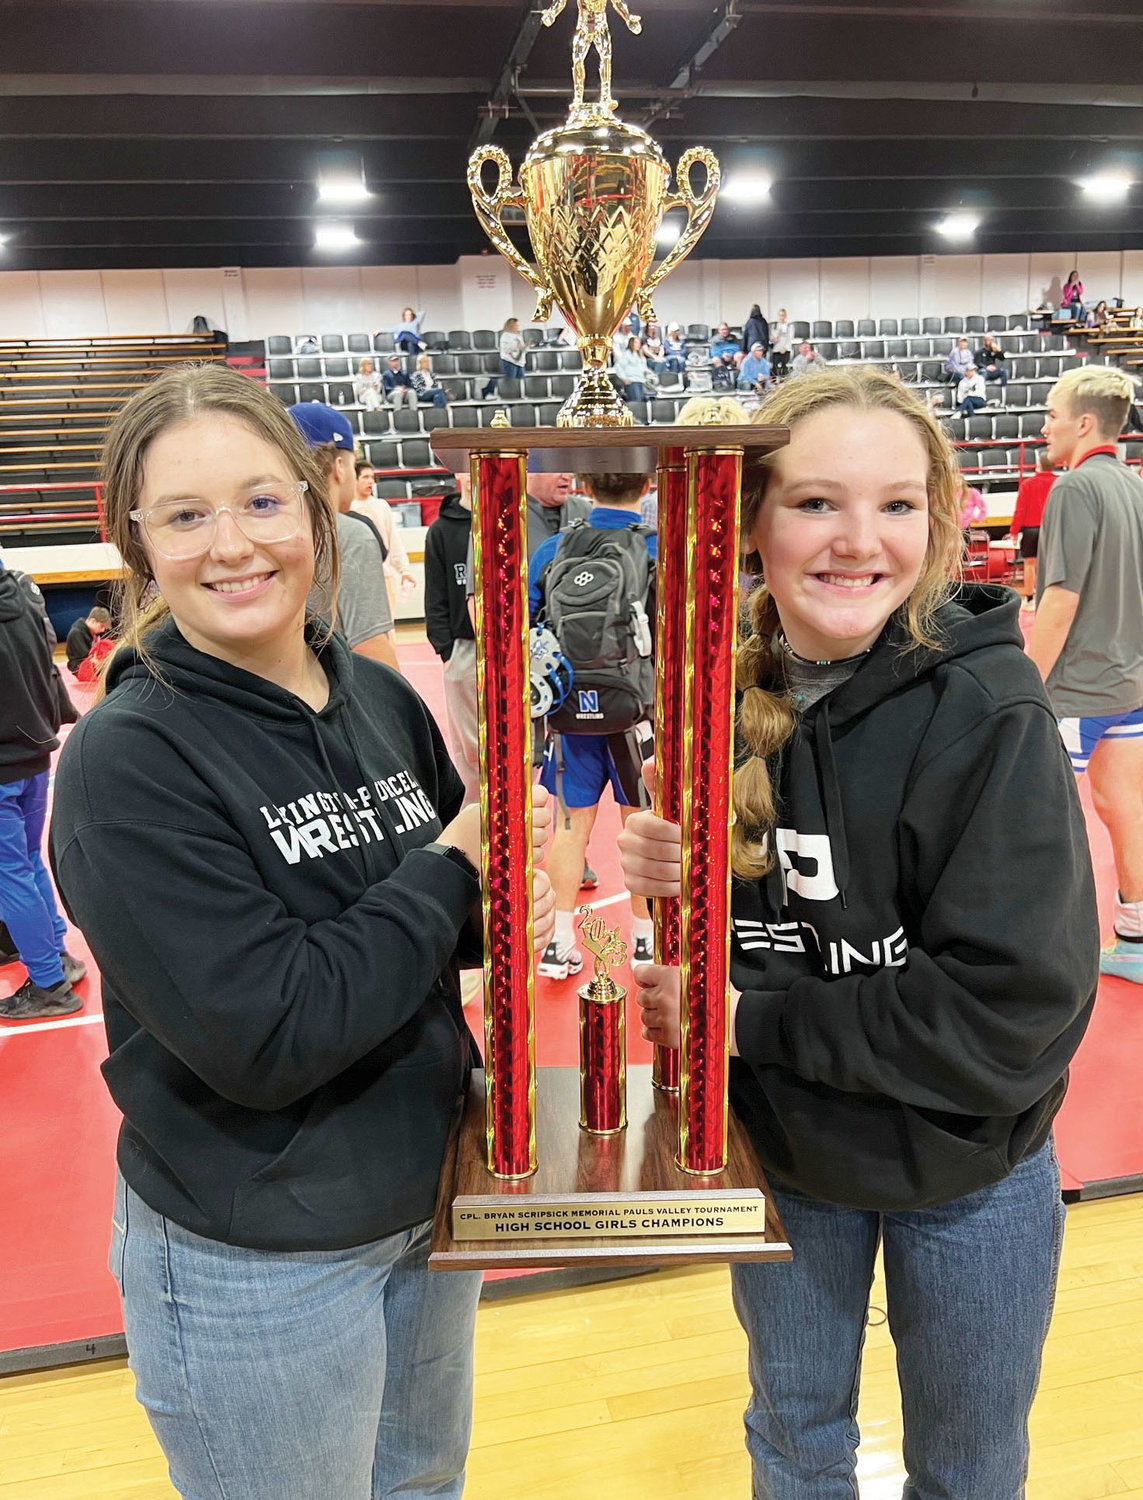 The Lexington girls were crowned tournament champions at the recent Pauls Valley wrestling tournament. From left are Bailey Forbes, Izzy Pack, Cilee Turner, Elexa Collins, Mo Collins and coach Mike McKay. Holding the trophy are Elexa and Mo.